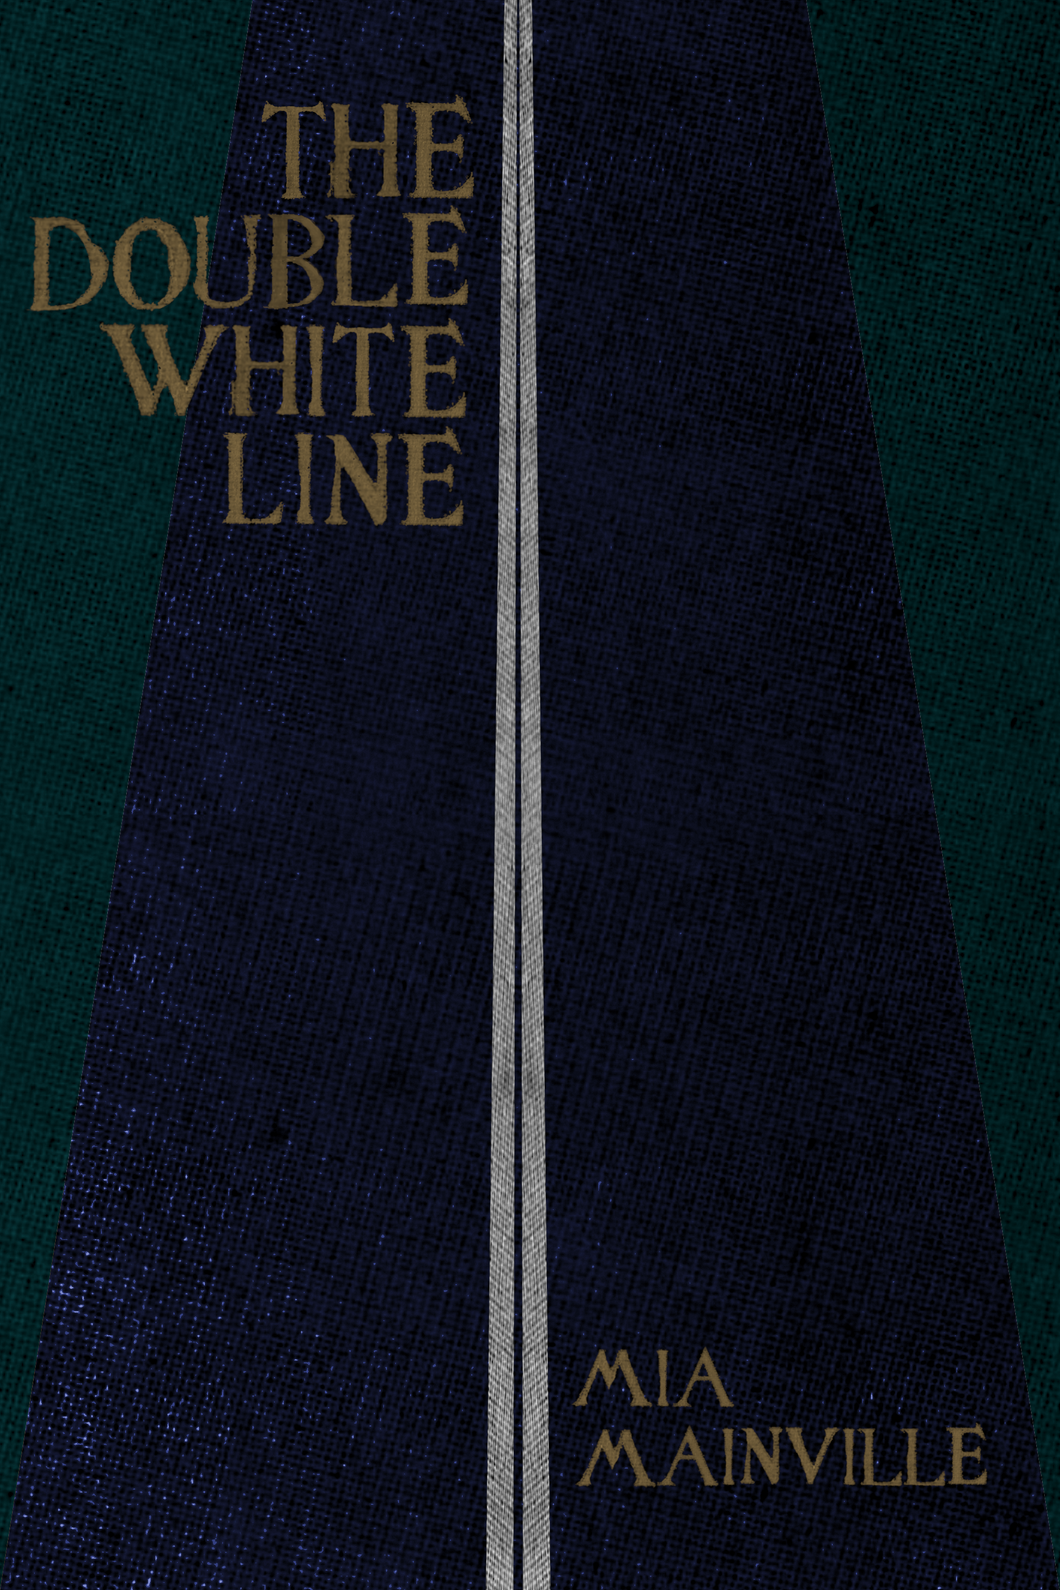 The Double White Line, by Mia Mainville-Print Books-Bottlecap Press